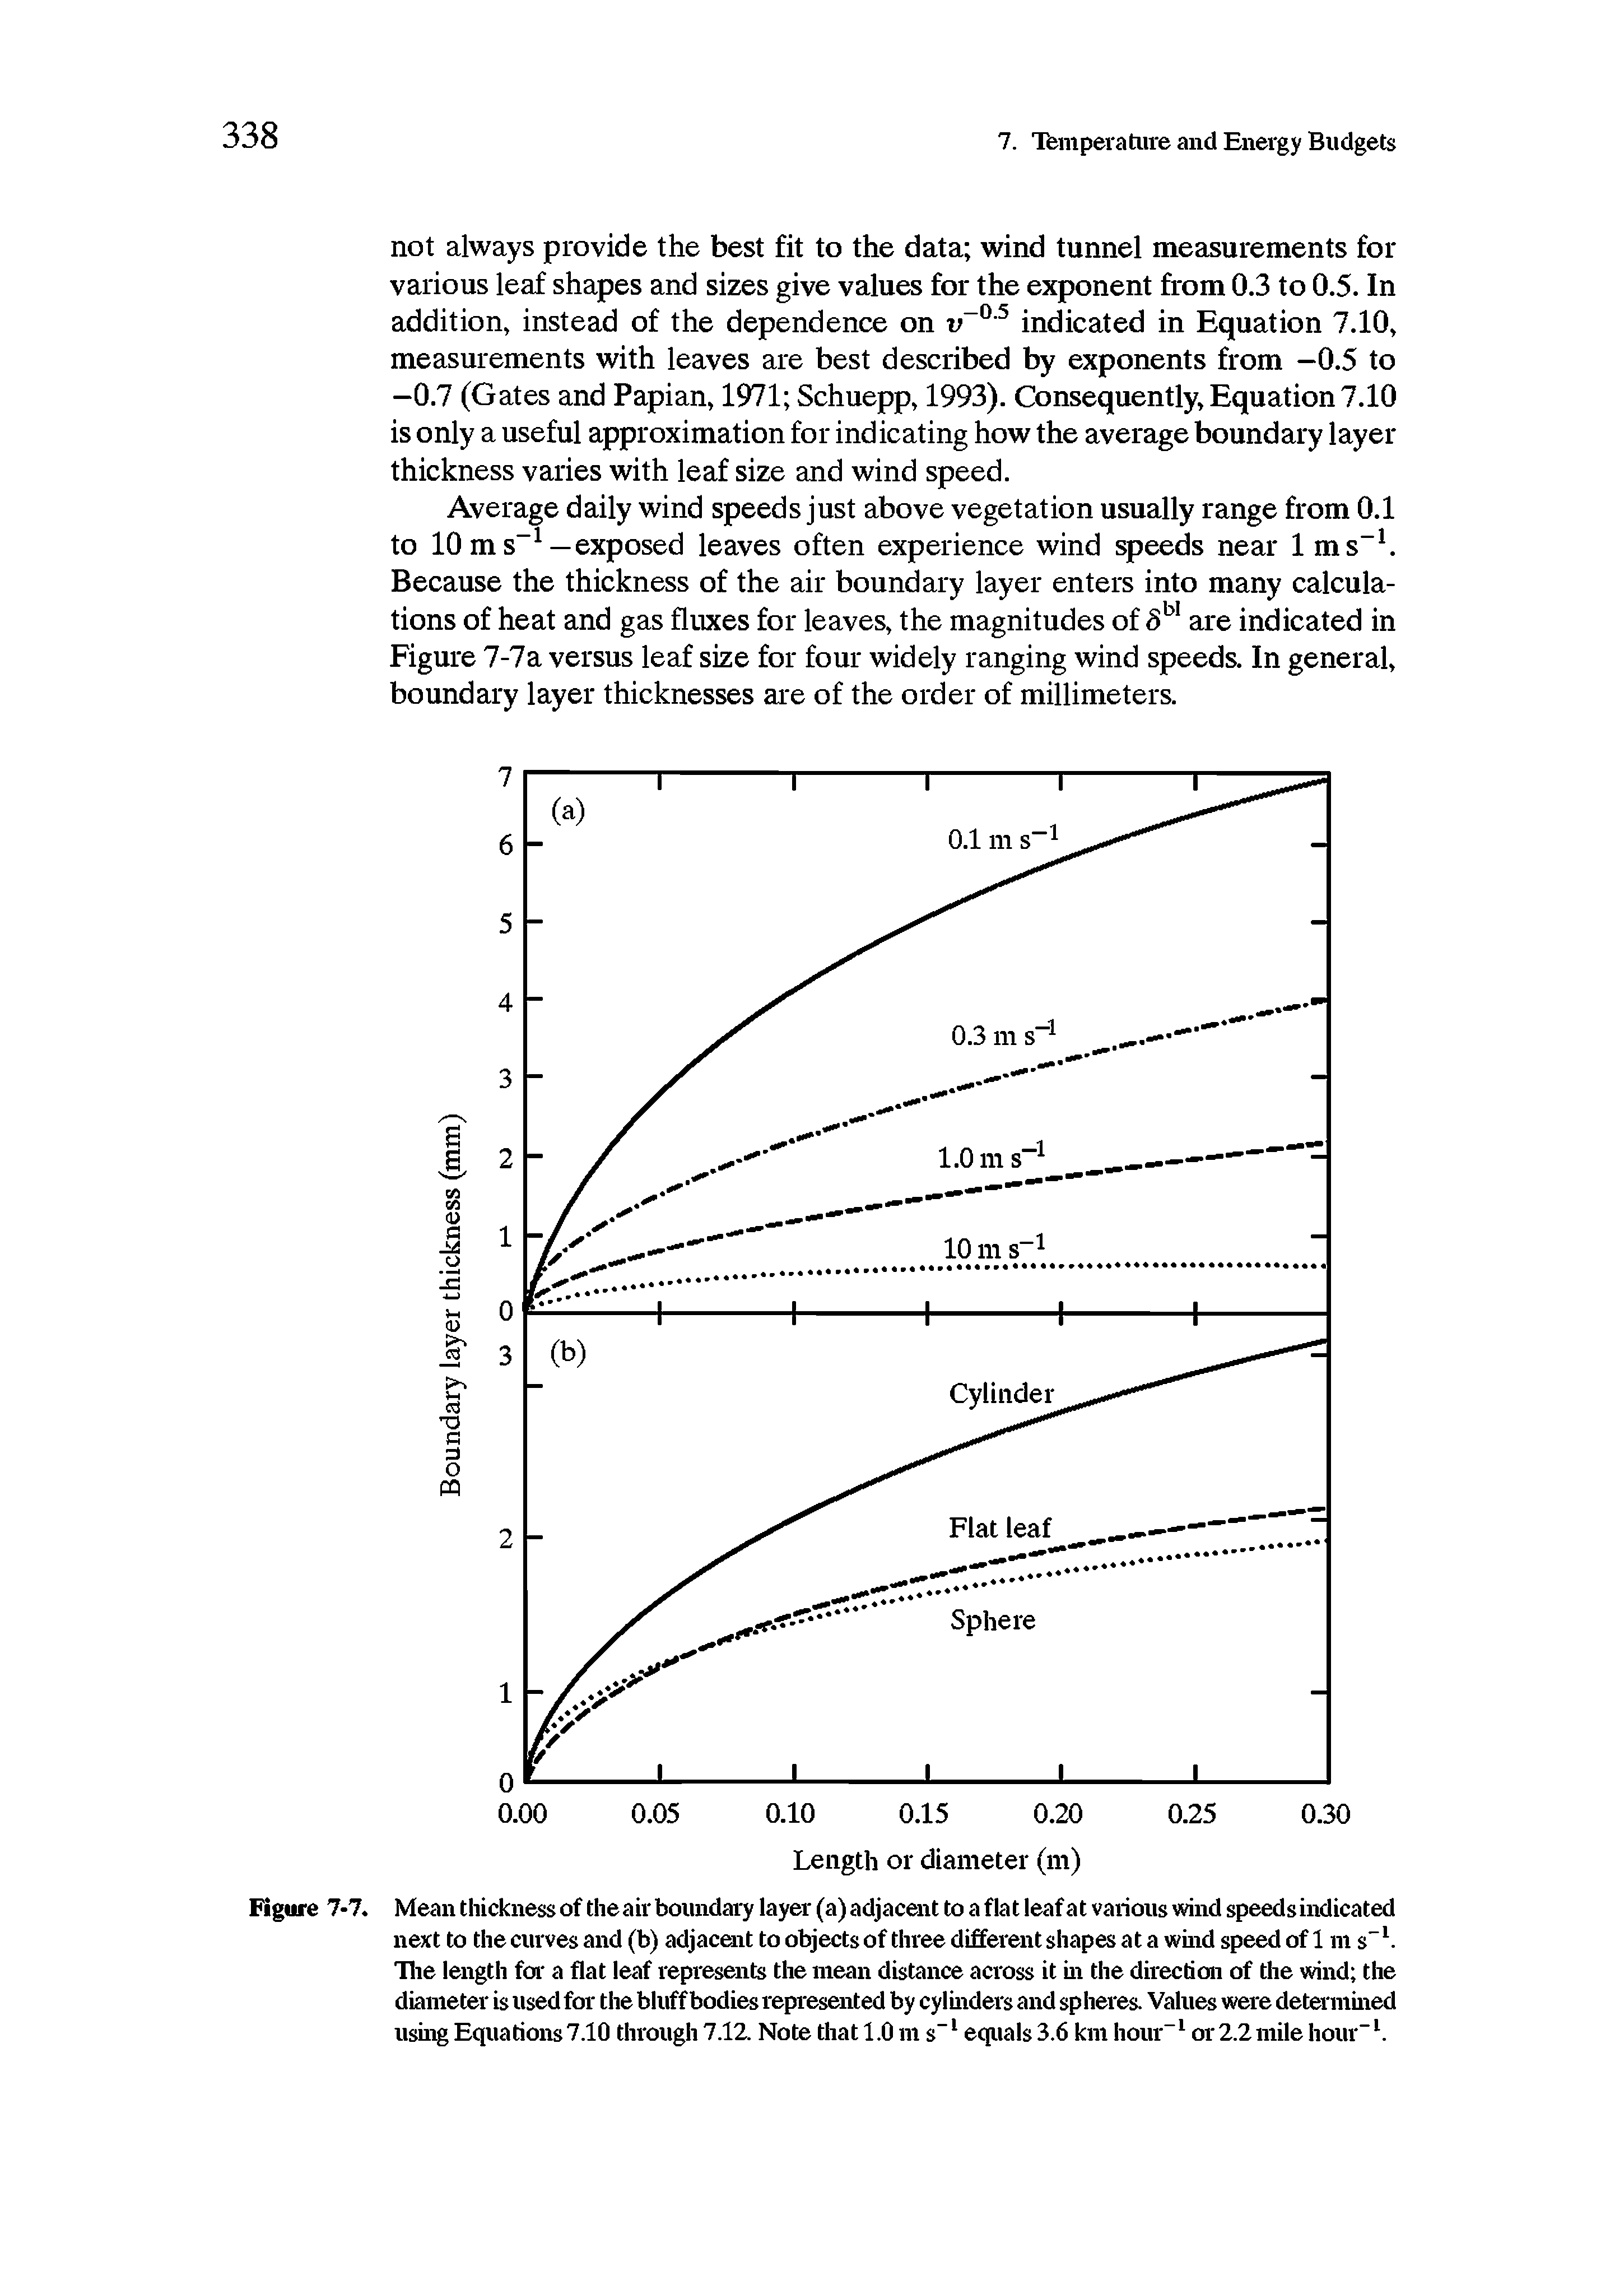 Figure 7-7. Mean thickness of the air boundary layer (a) adjacent to a flat leaf at various wind speeds indicated next to the curves and (b) adjacent to objects of three different shapes at a wind speed of 1 m s-1. The length for a flat leaf represents the mean distance across it in the direction of the wind the diameter is used for the bluff bodies represented by cylinders and sp heres. Values were determined using Equations 7.10 through 7.12. Note that 1.0 m s-1 equals 3.6 km hour-1 or 2.2 mile hour-1.